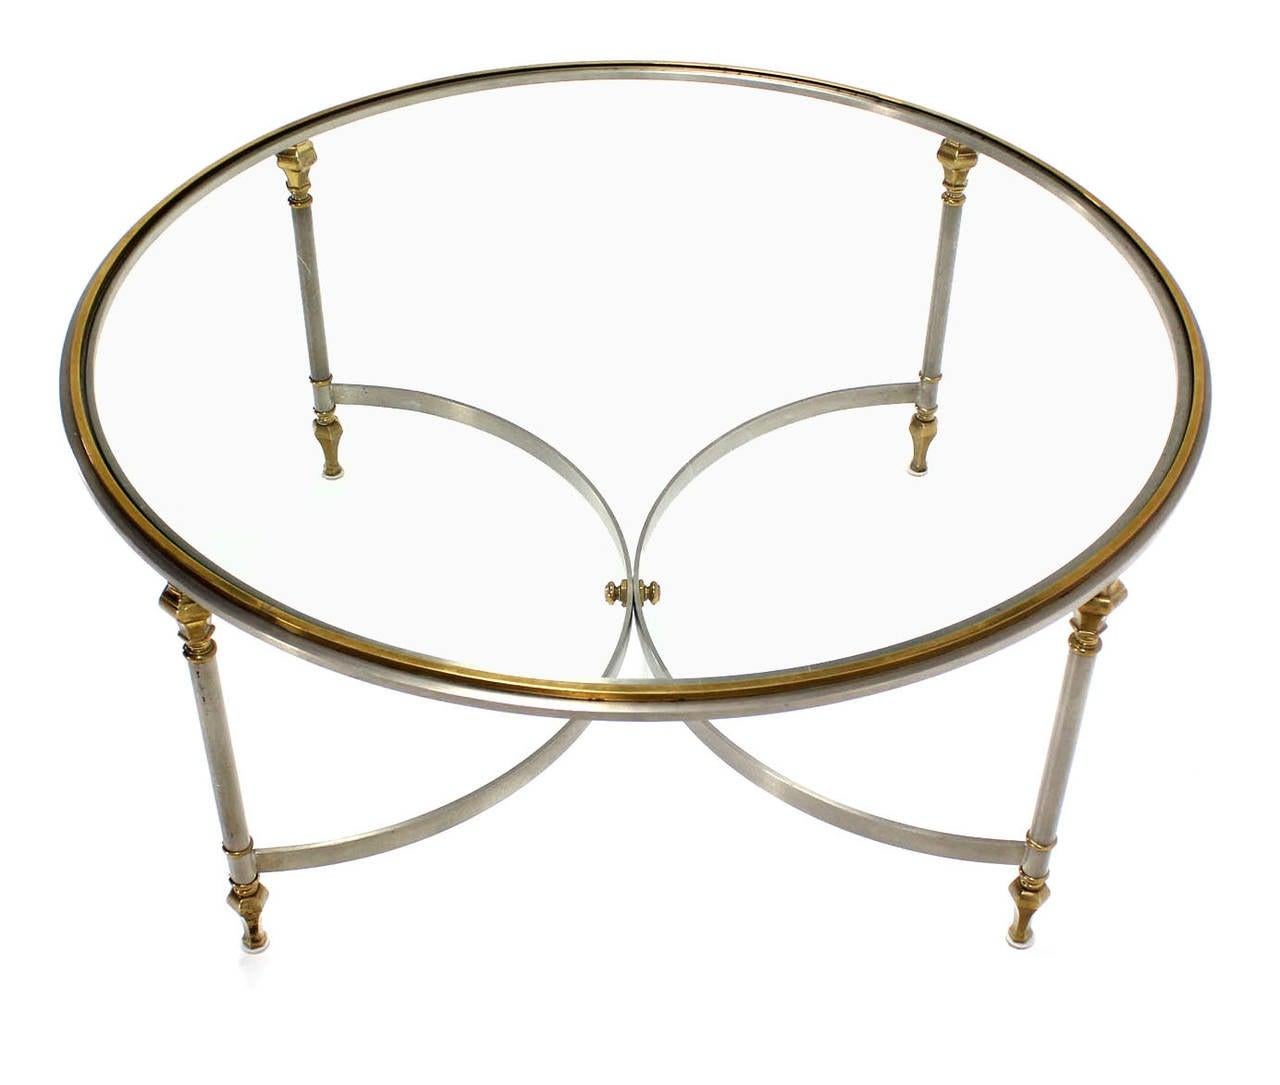 Italian Mid Century Modern Round Chrome Brass Glass Top Center Coffee Table MINT For Sale 2